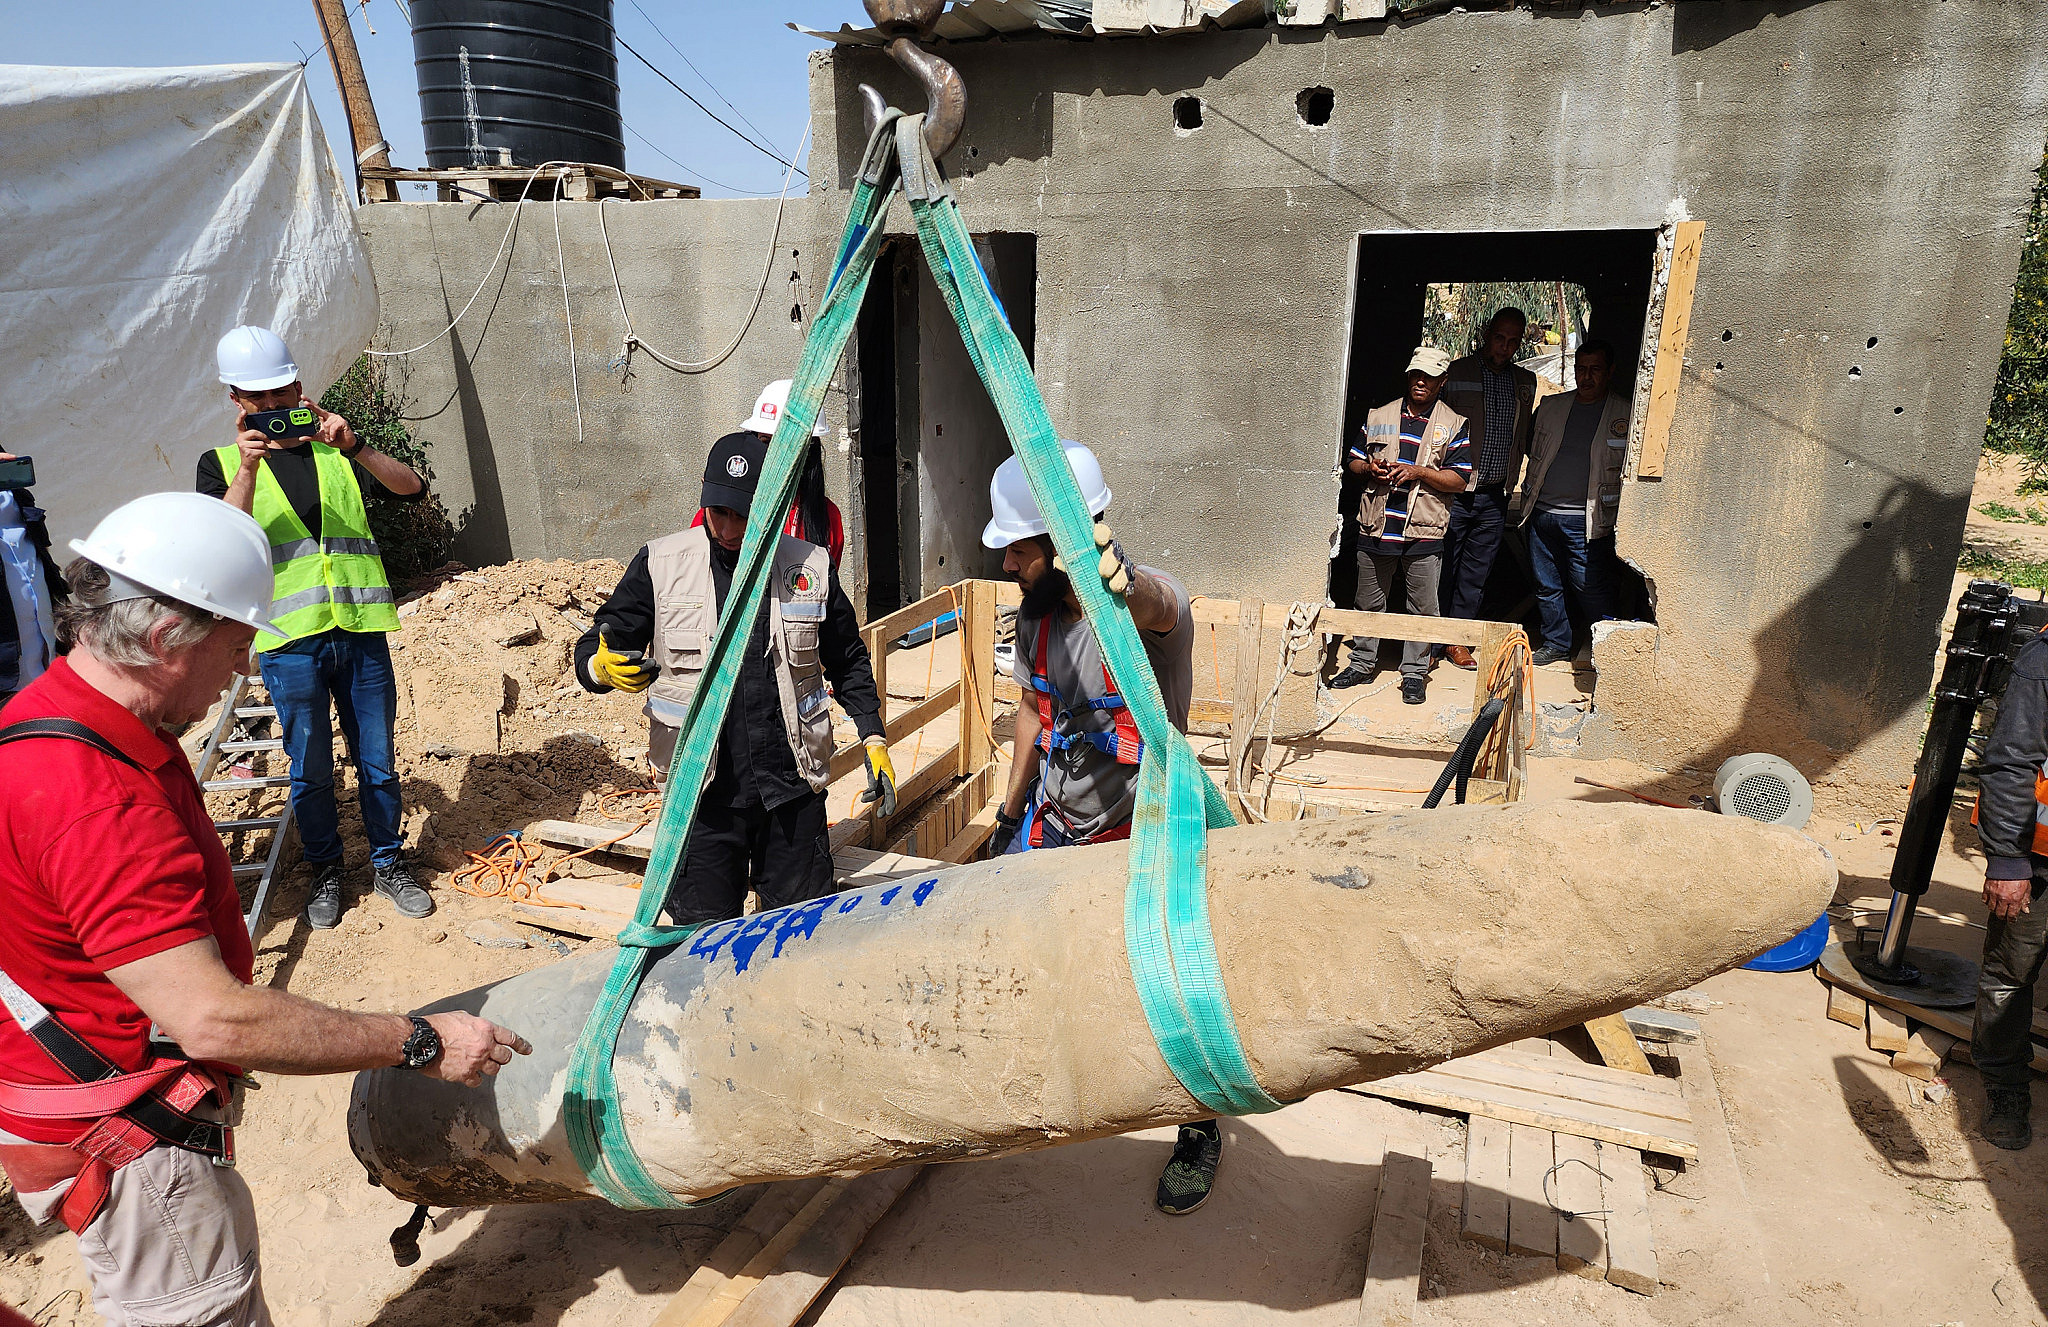 Palestinian police and members of the United Nations Mine Action Service (UNMAS) removing an Israeli bomb from the ground in Rafah, in the southern Gaza Strip, March 5, 2023. (Abed Rahim Khatib/Flash90)